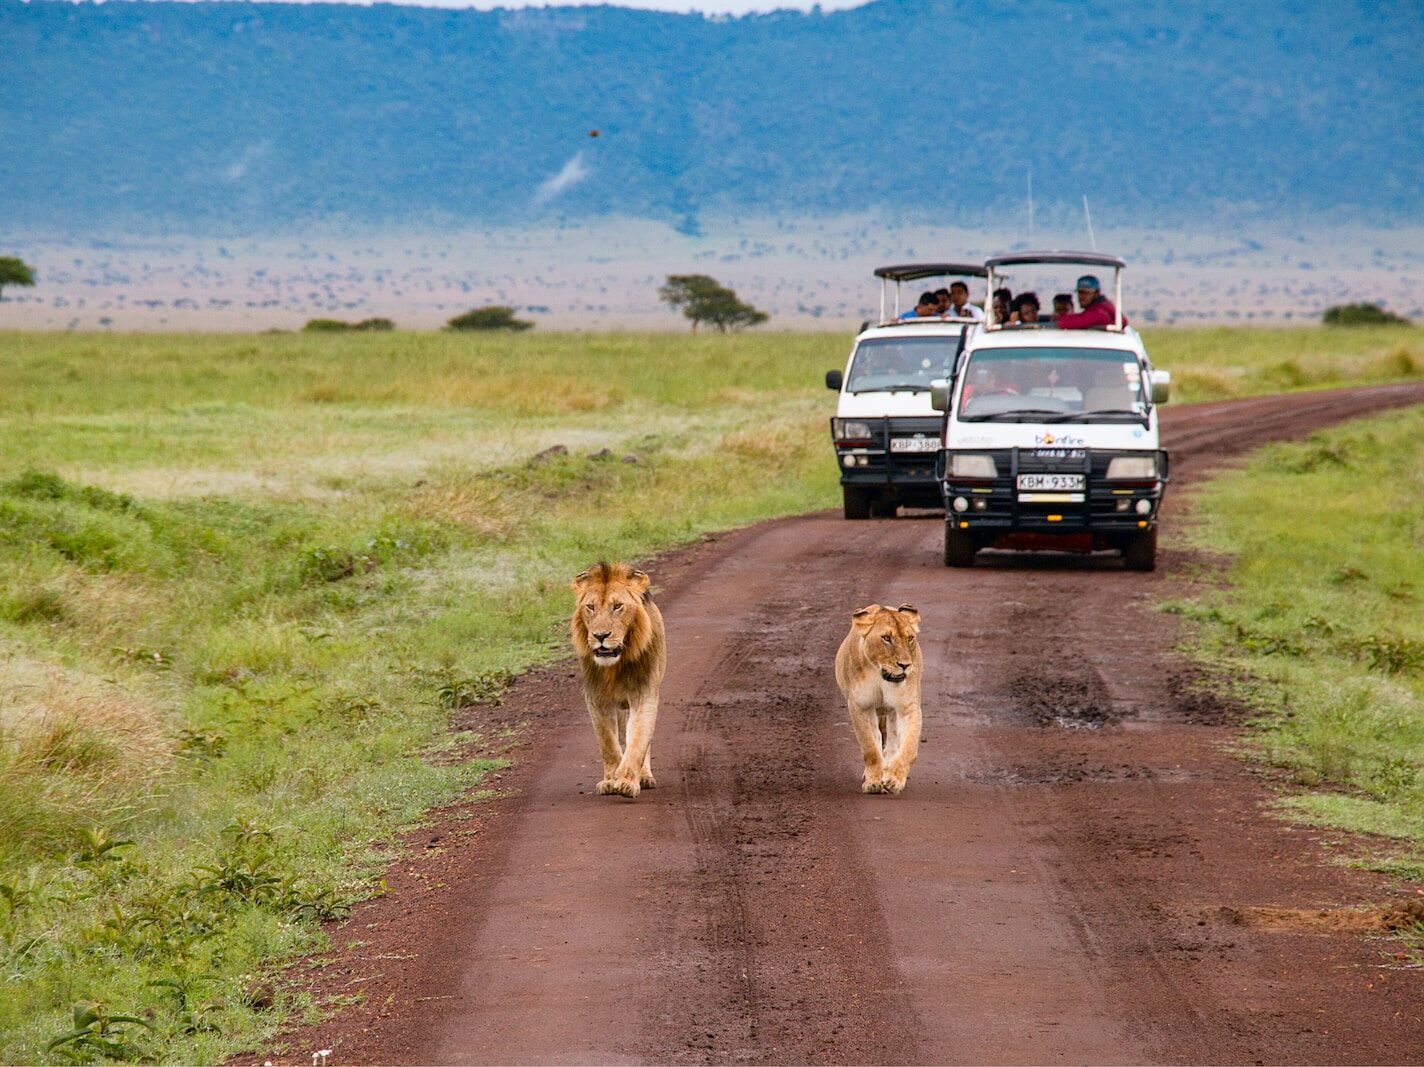 brown lion and lioness walking on dirt road during daytime